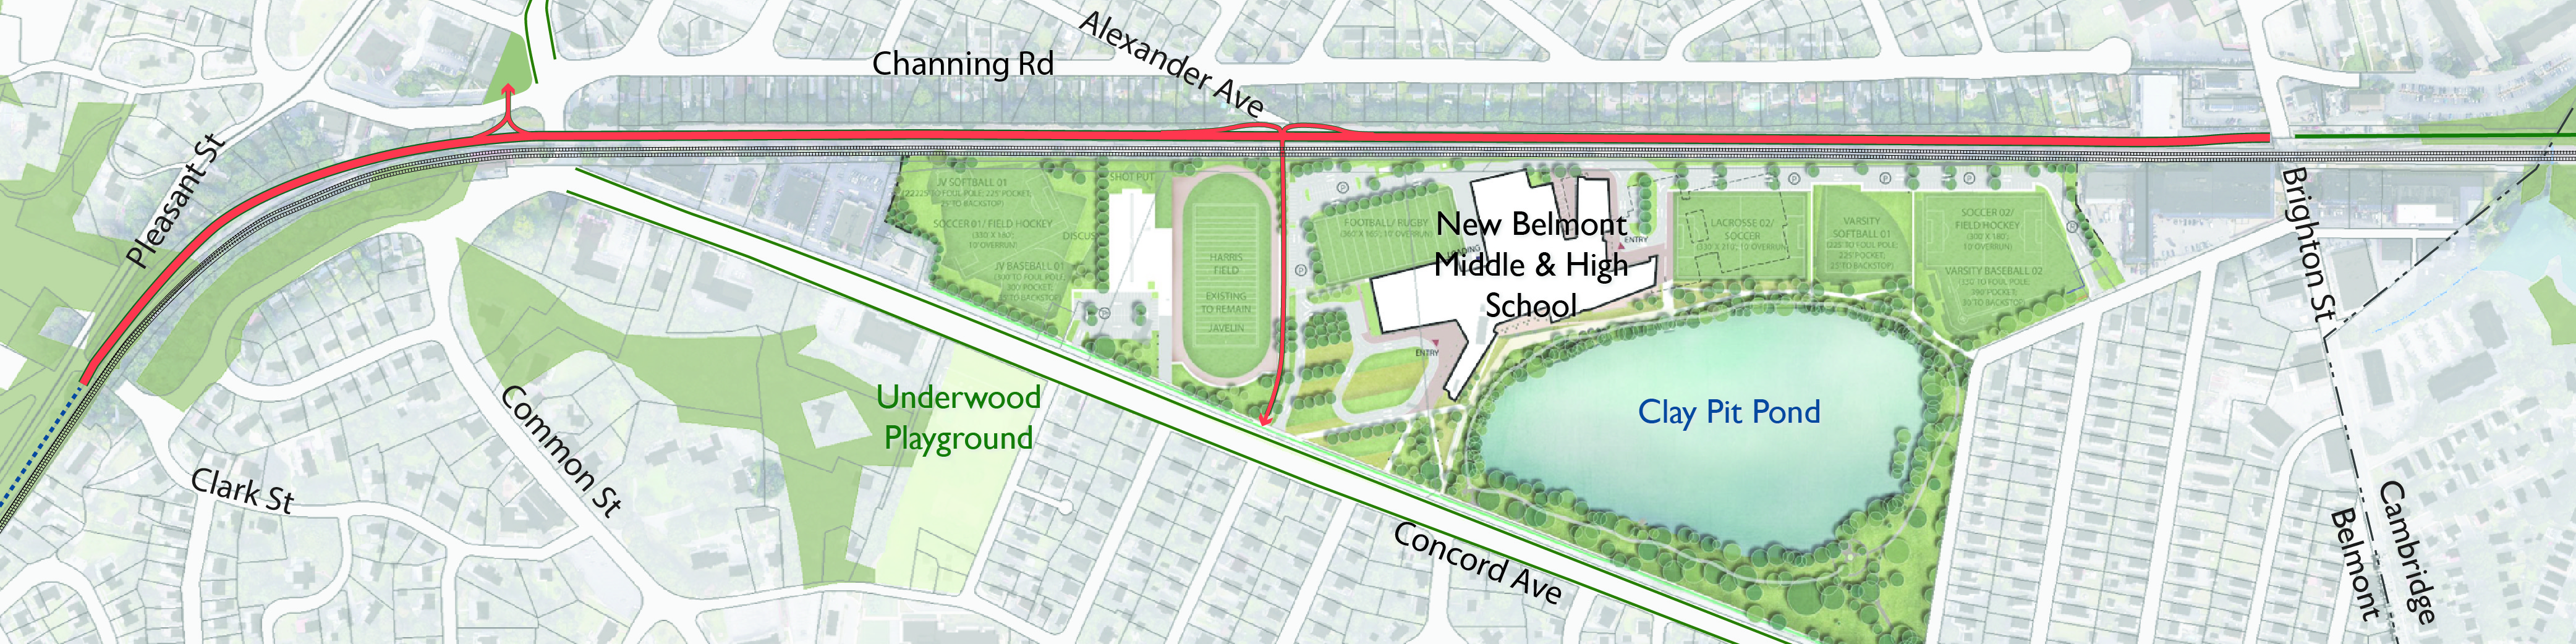 Proposed Belmont Community Path Route